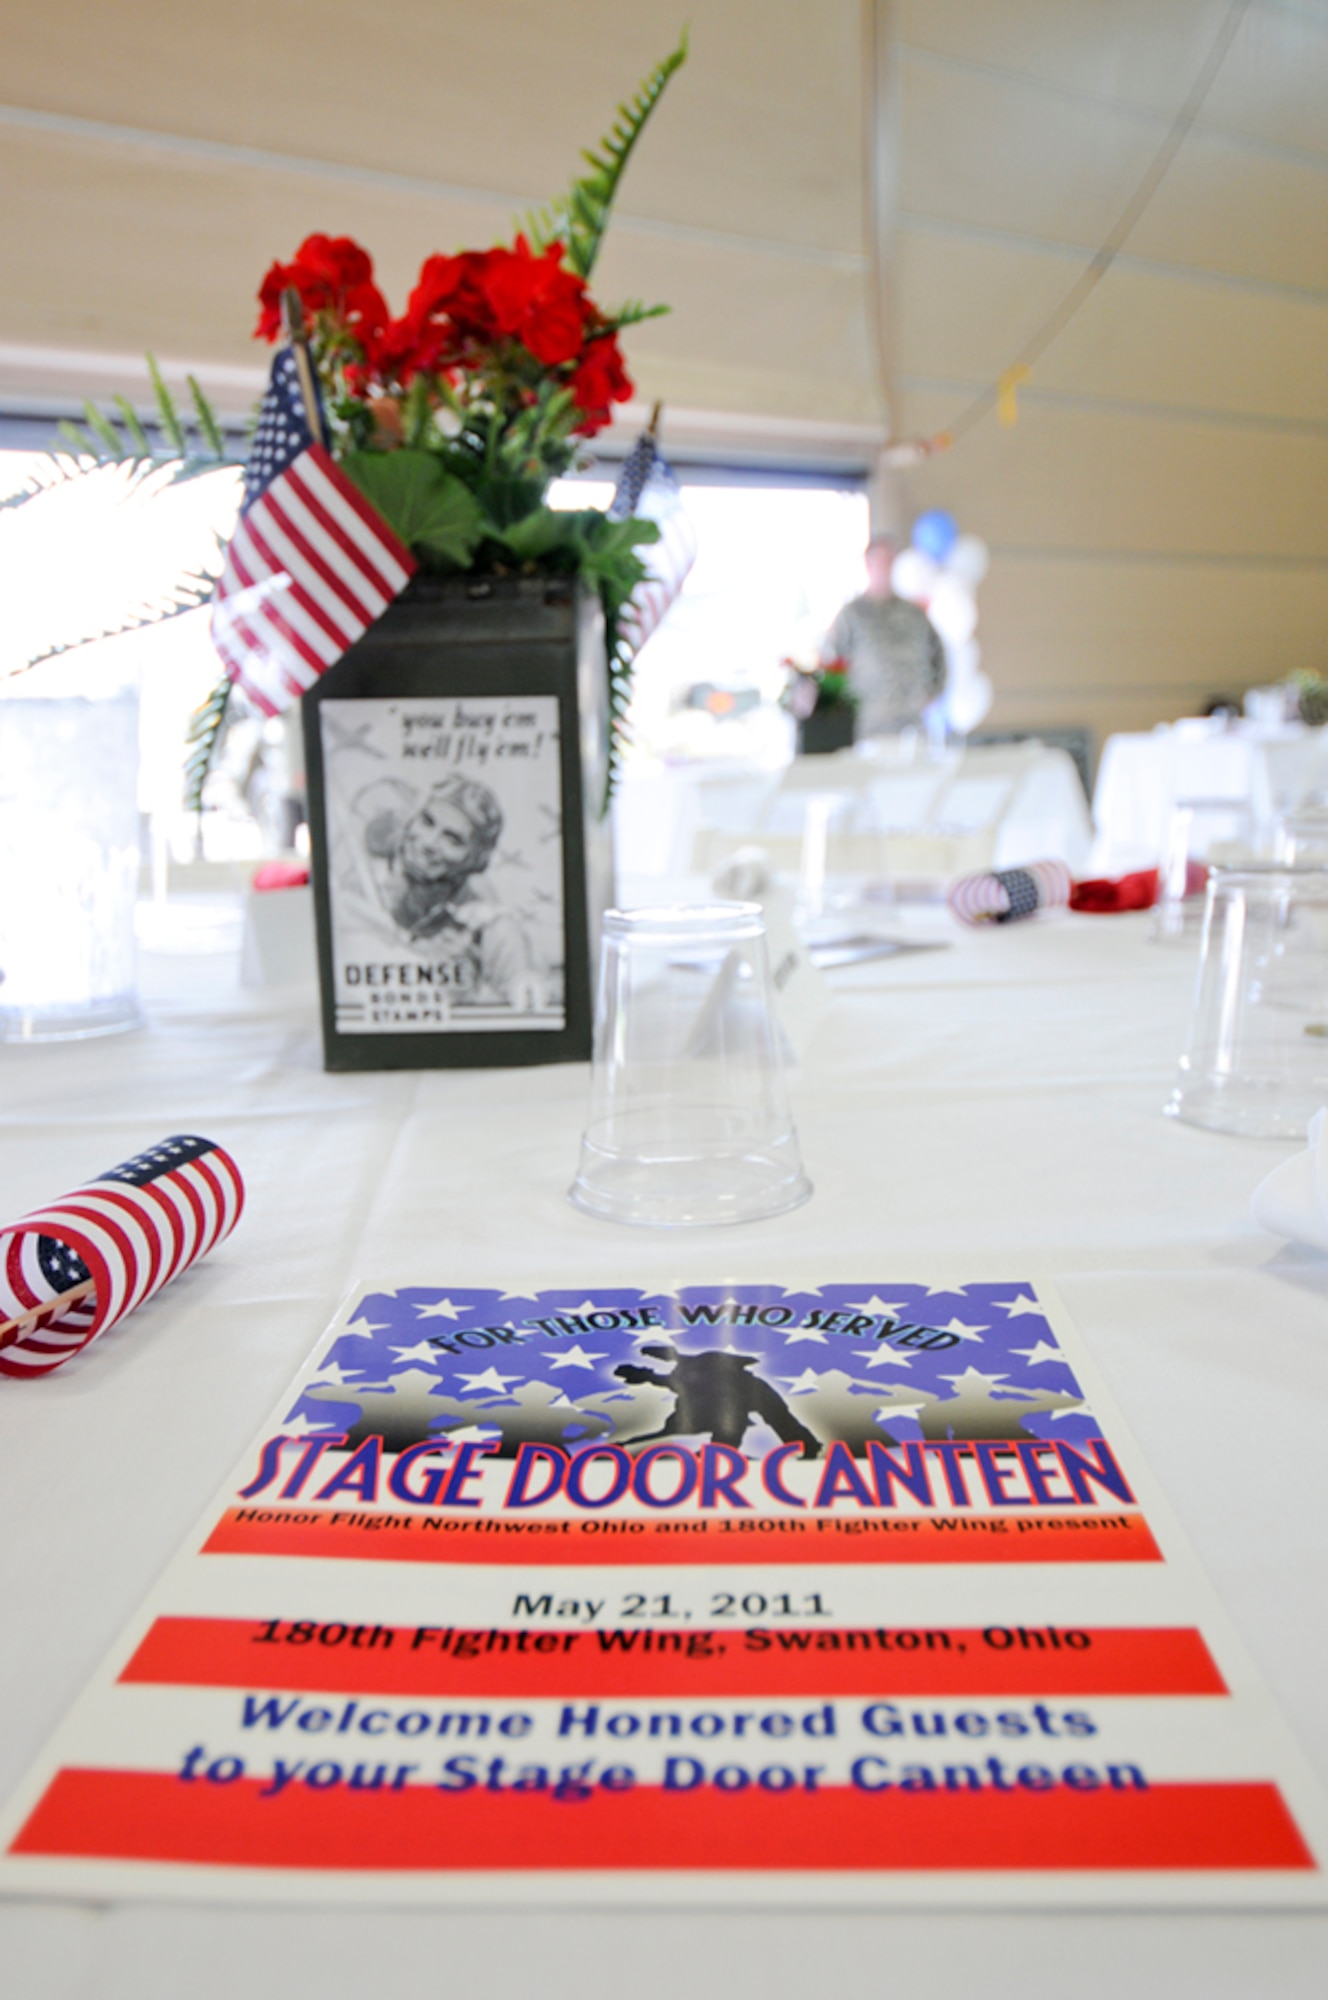 The 180th Fighter Wing and Honor Flight of Northwest Ohio hosted the Stage Door Canteen, May 21 at the 180th Fighter Wing. The hangar was transformed into a scene of a WWII canteen dance.